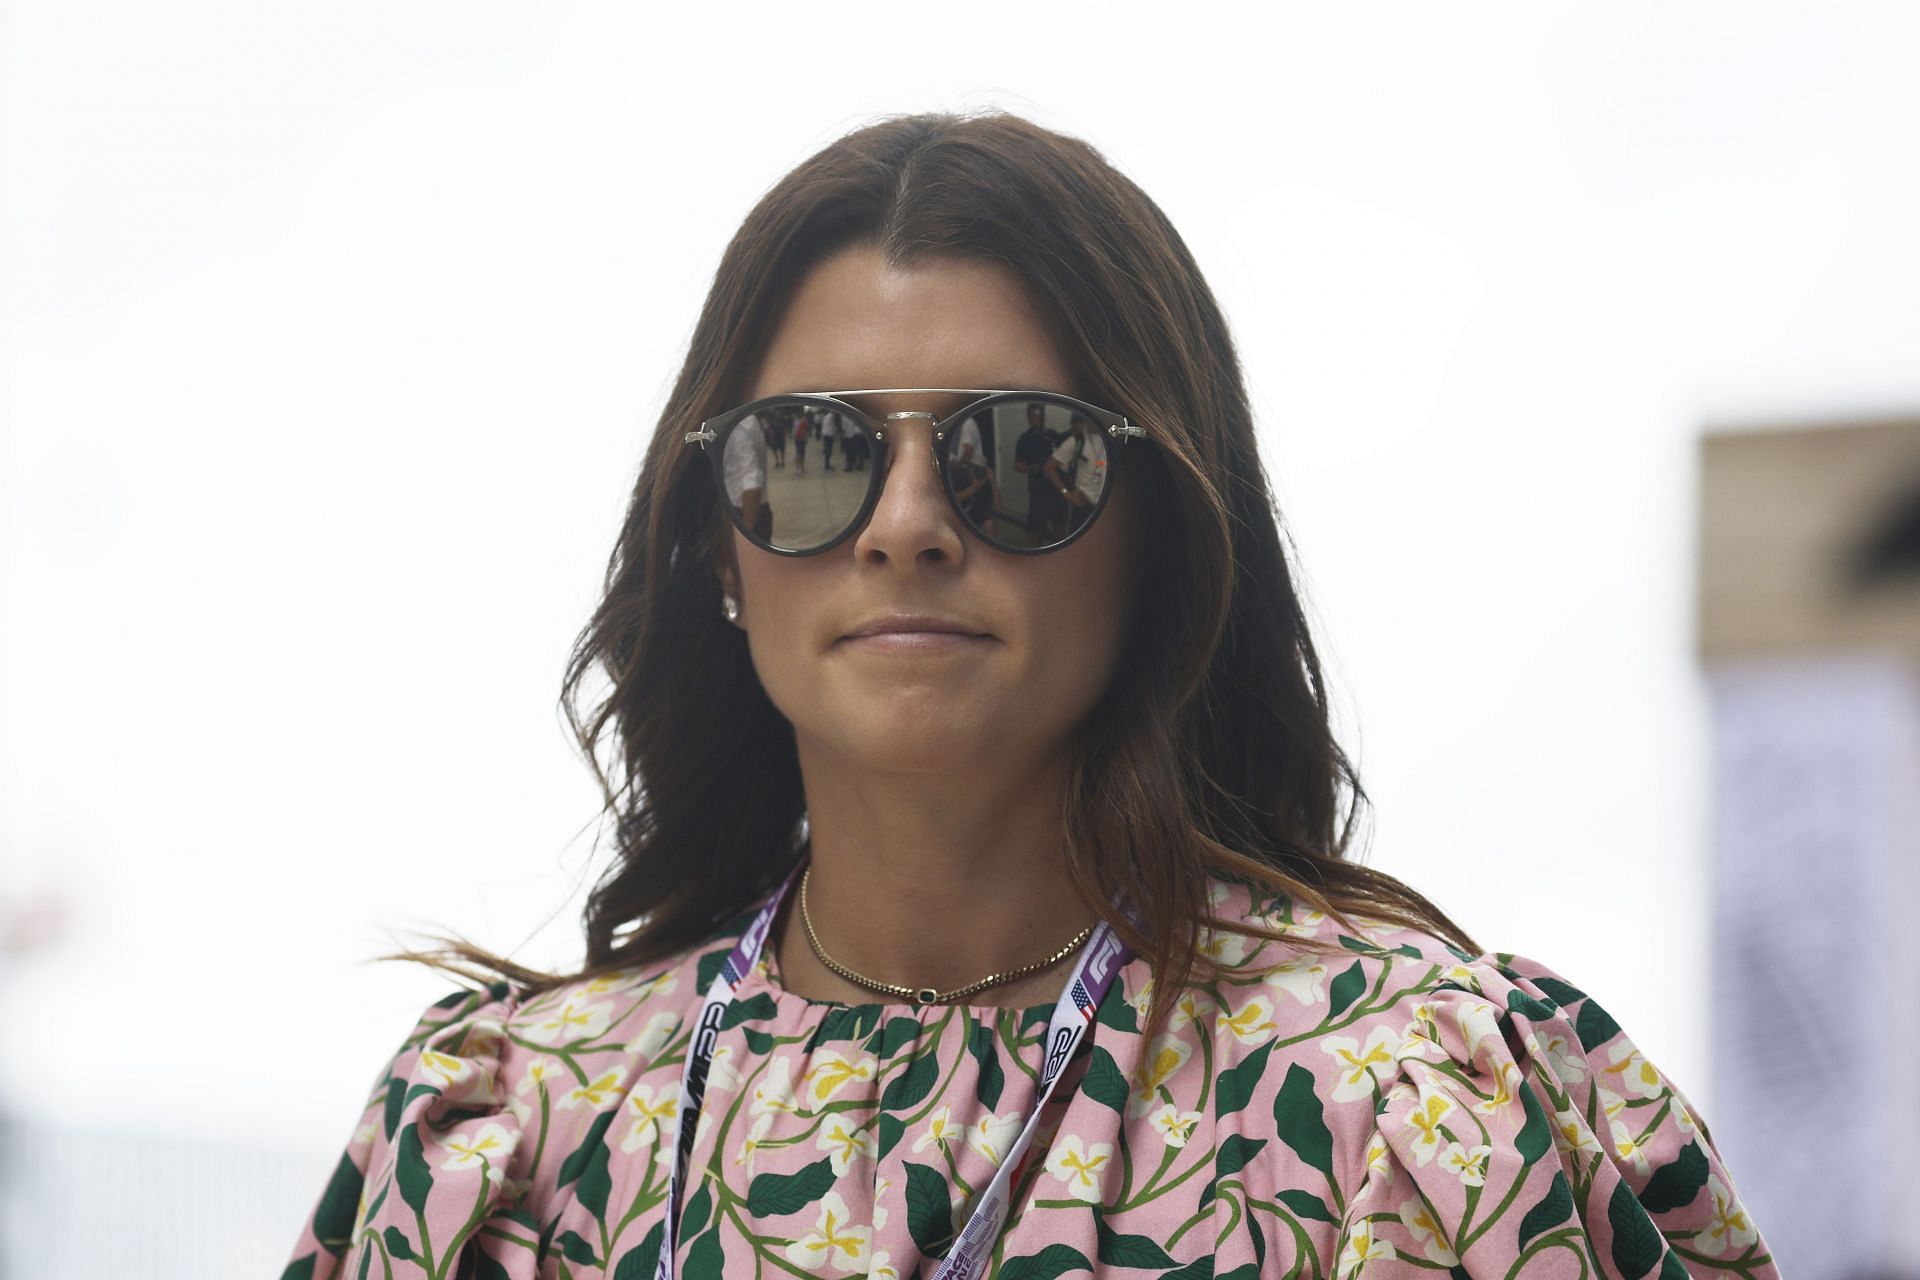 Danica Patrick walks in the Paddock before the 2022 F1 Miami Grand Prix at the Miami International Autodrome (Photo by Chris Graythen/Getty Images)